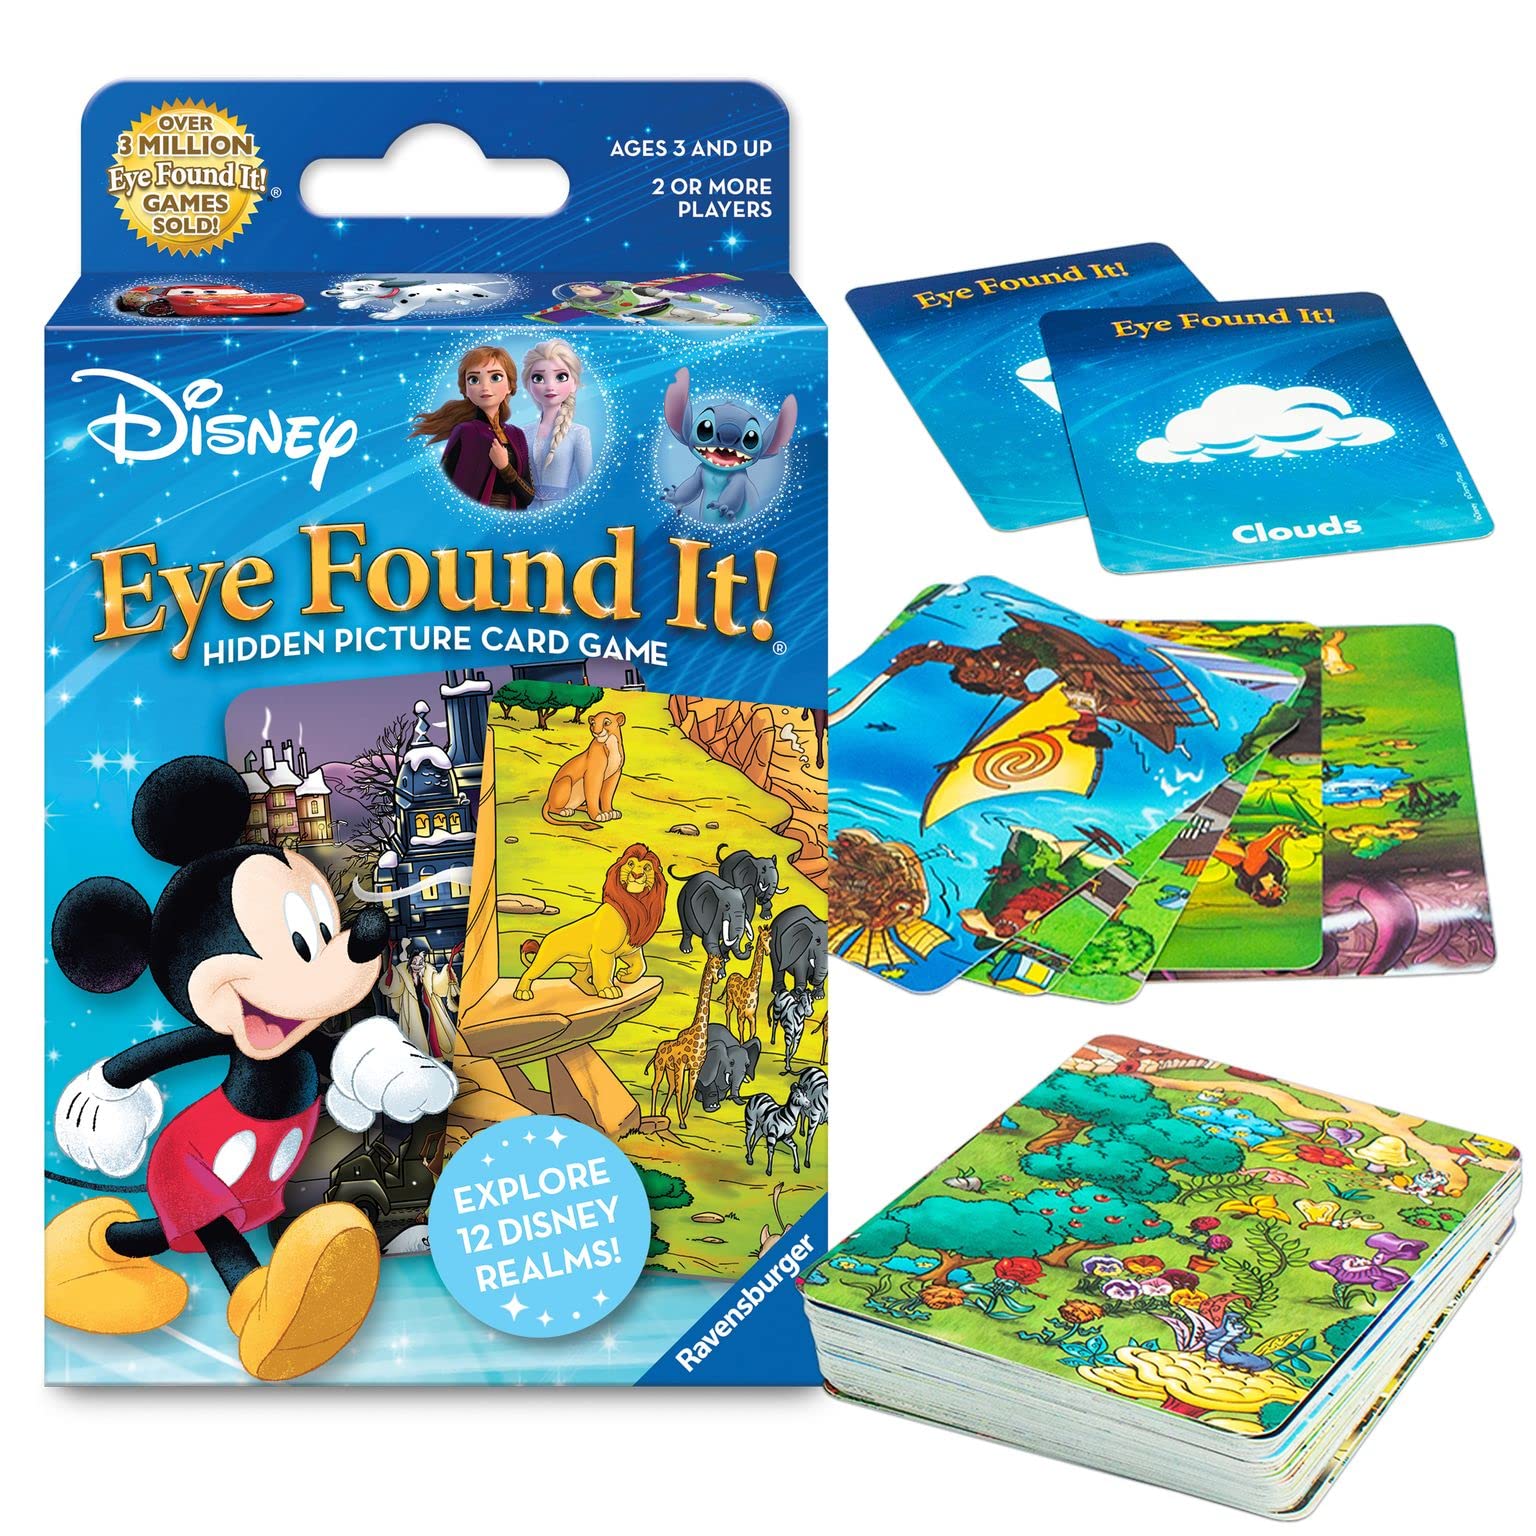 Ravensburger World of Disney Eye Found It Card Game for Boys & Girls Ages 3 and Up - A Fun Family Game You''ll Want to Play Again and Again